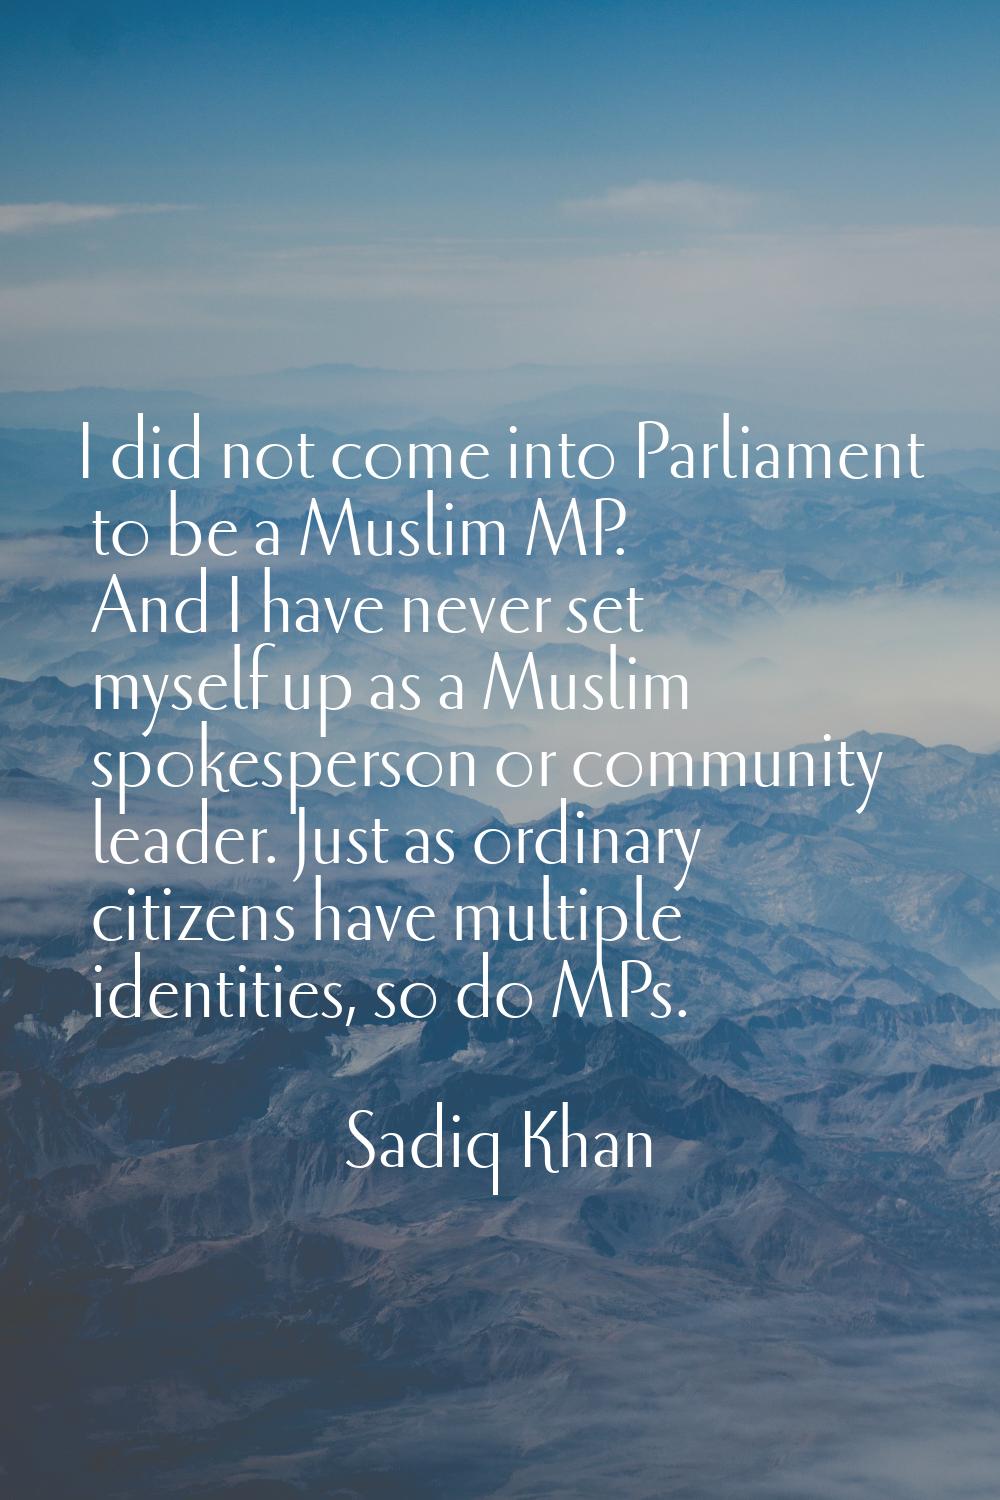 I did not come into Parliament to be a Muslim MP. And I have never set myself up as a Muslim spokes